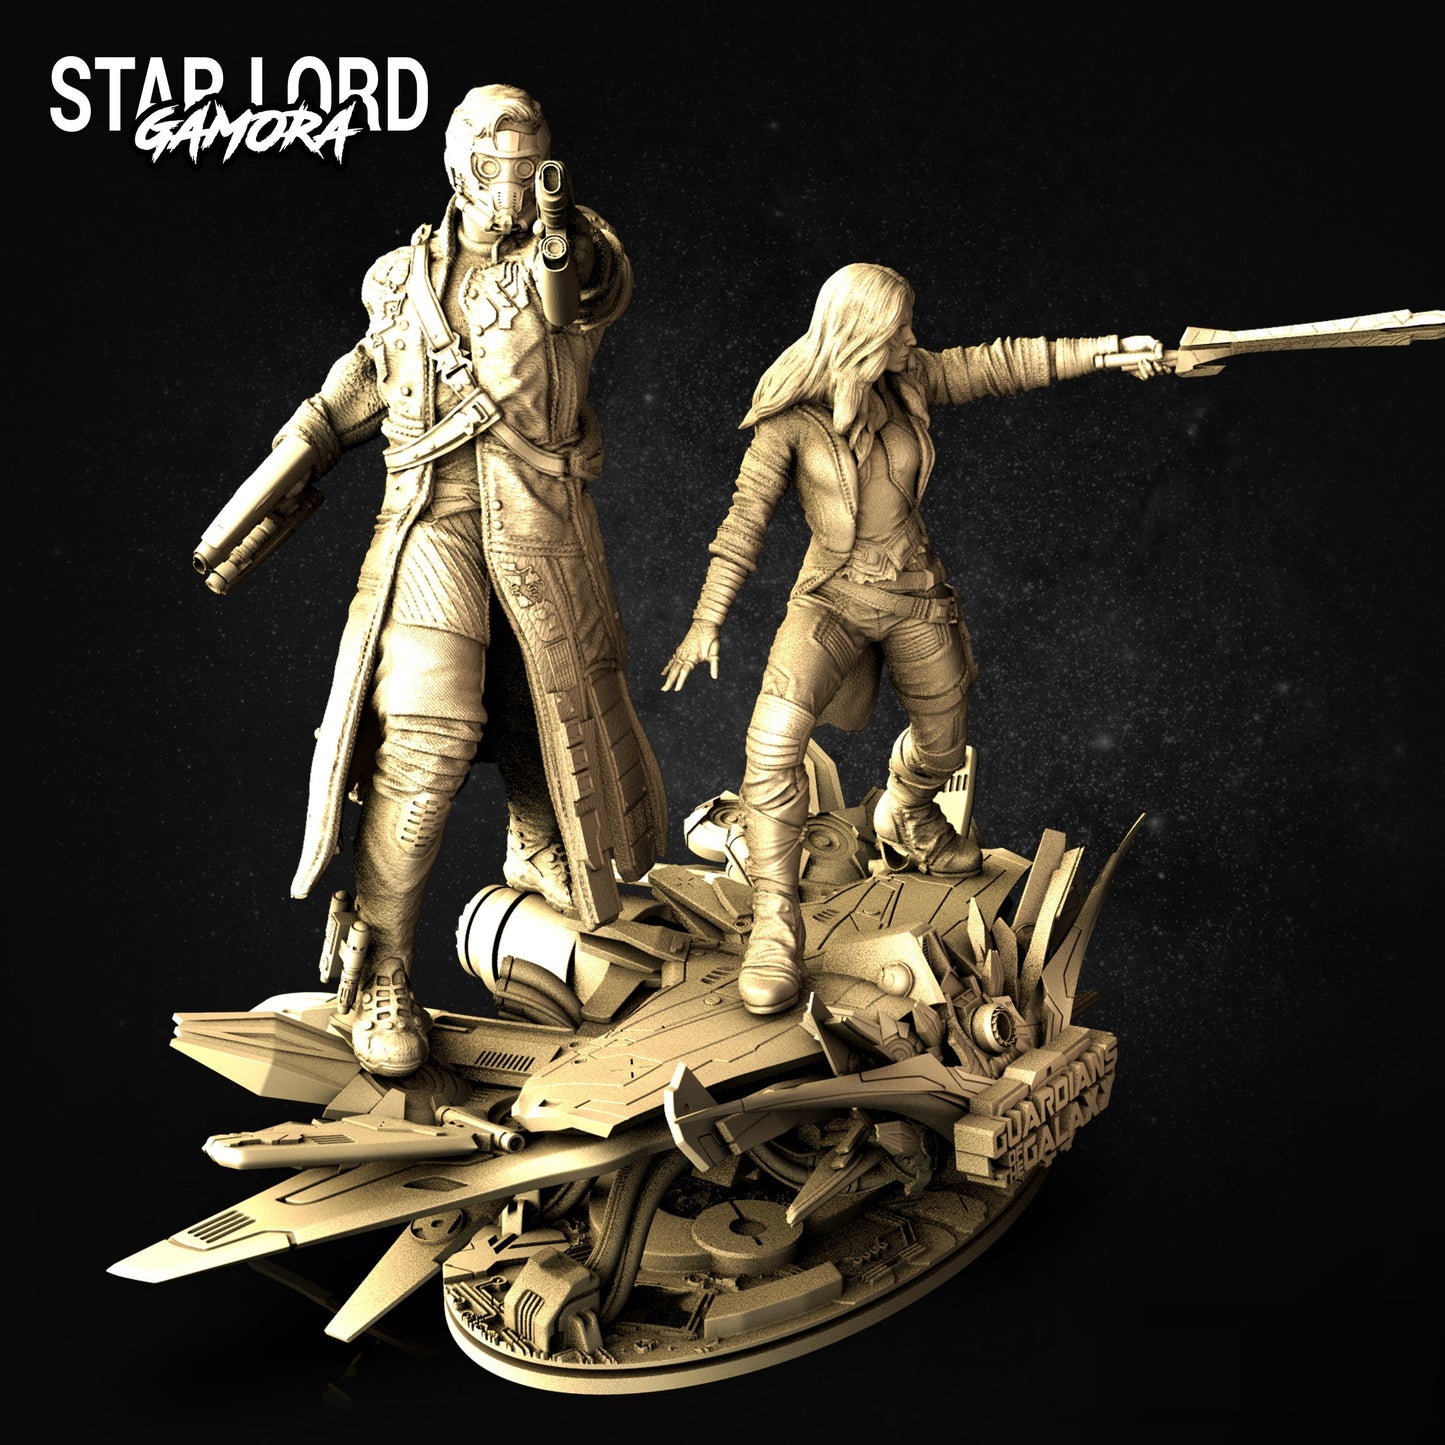 Guardian Of The Galaxy STL Avengers STL File 3D Printing Design Movie Character STL File S043